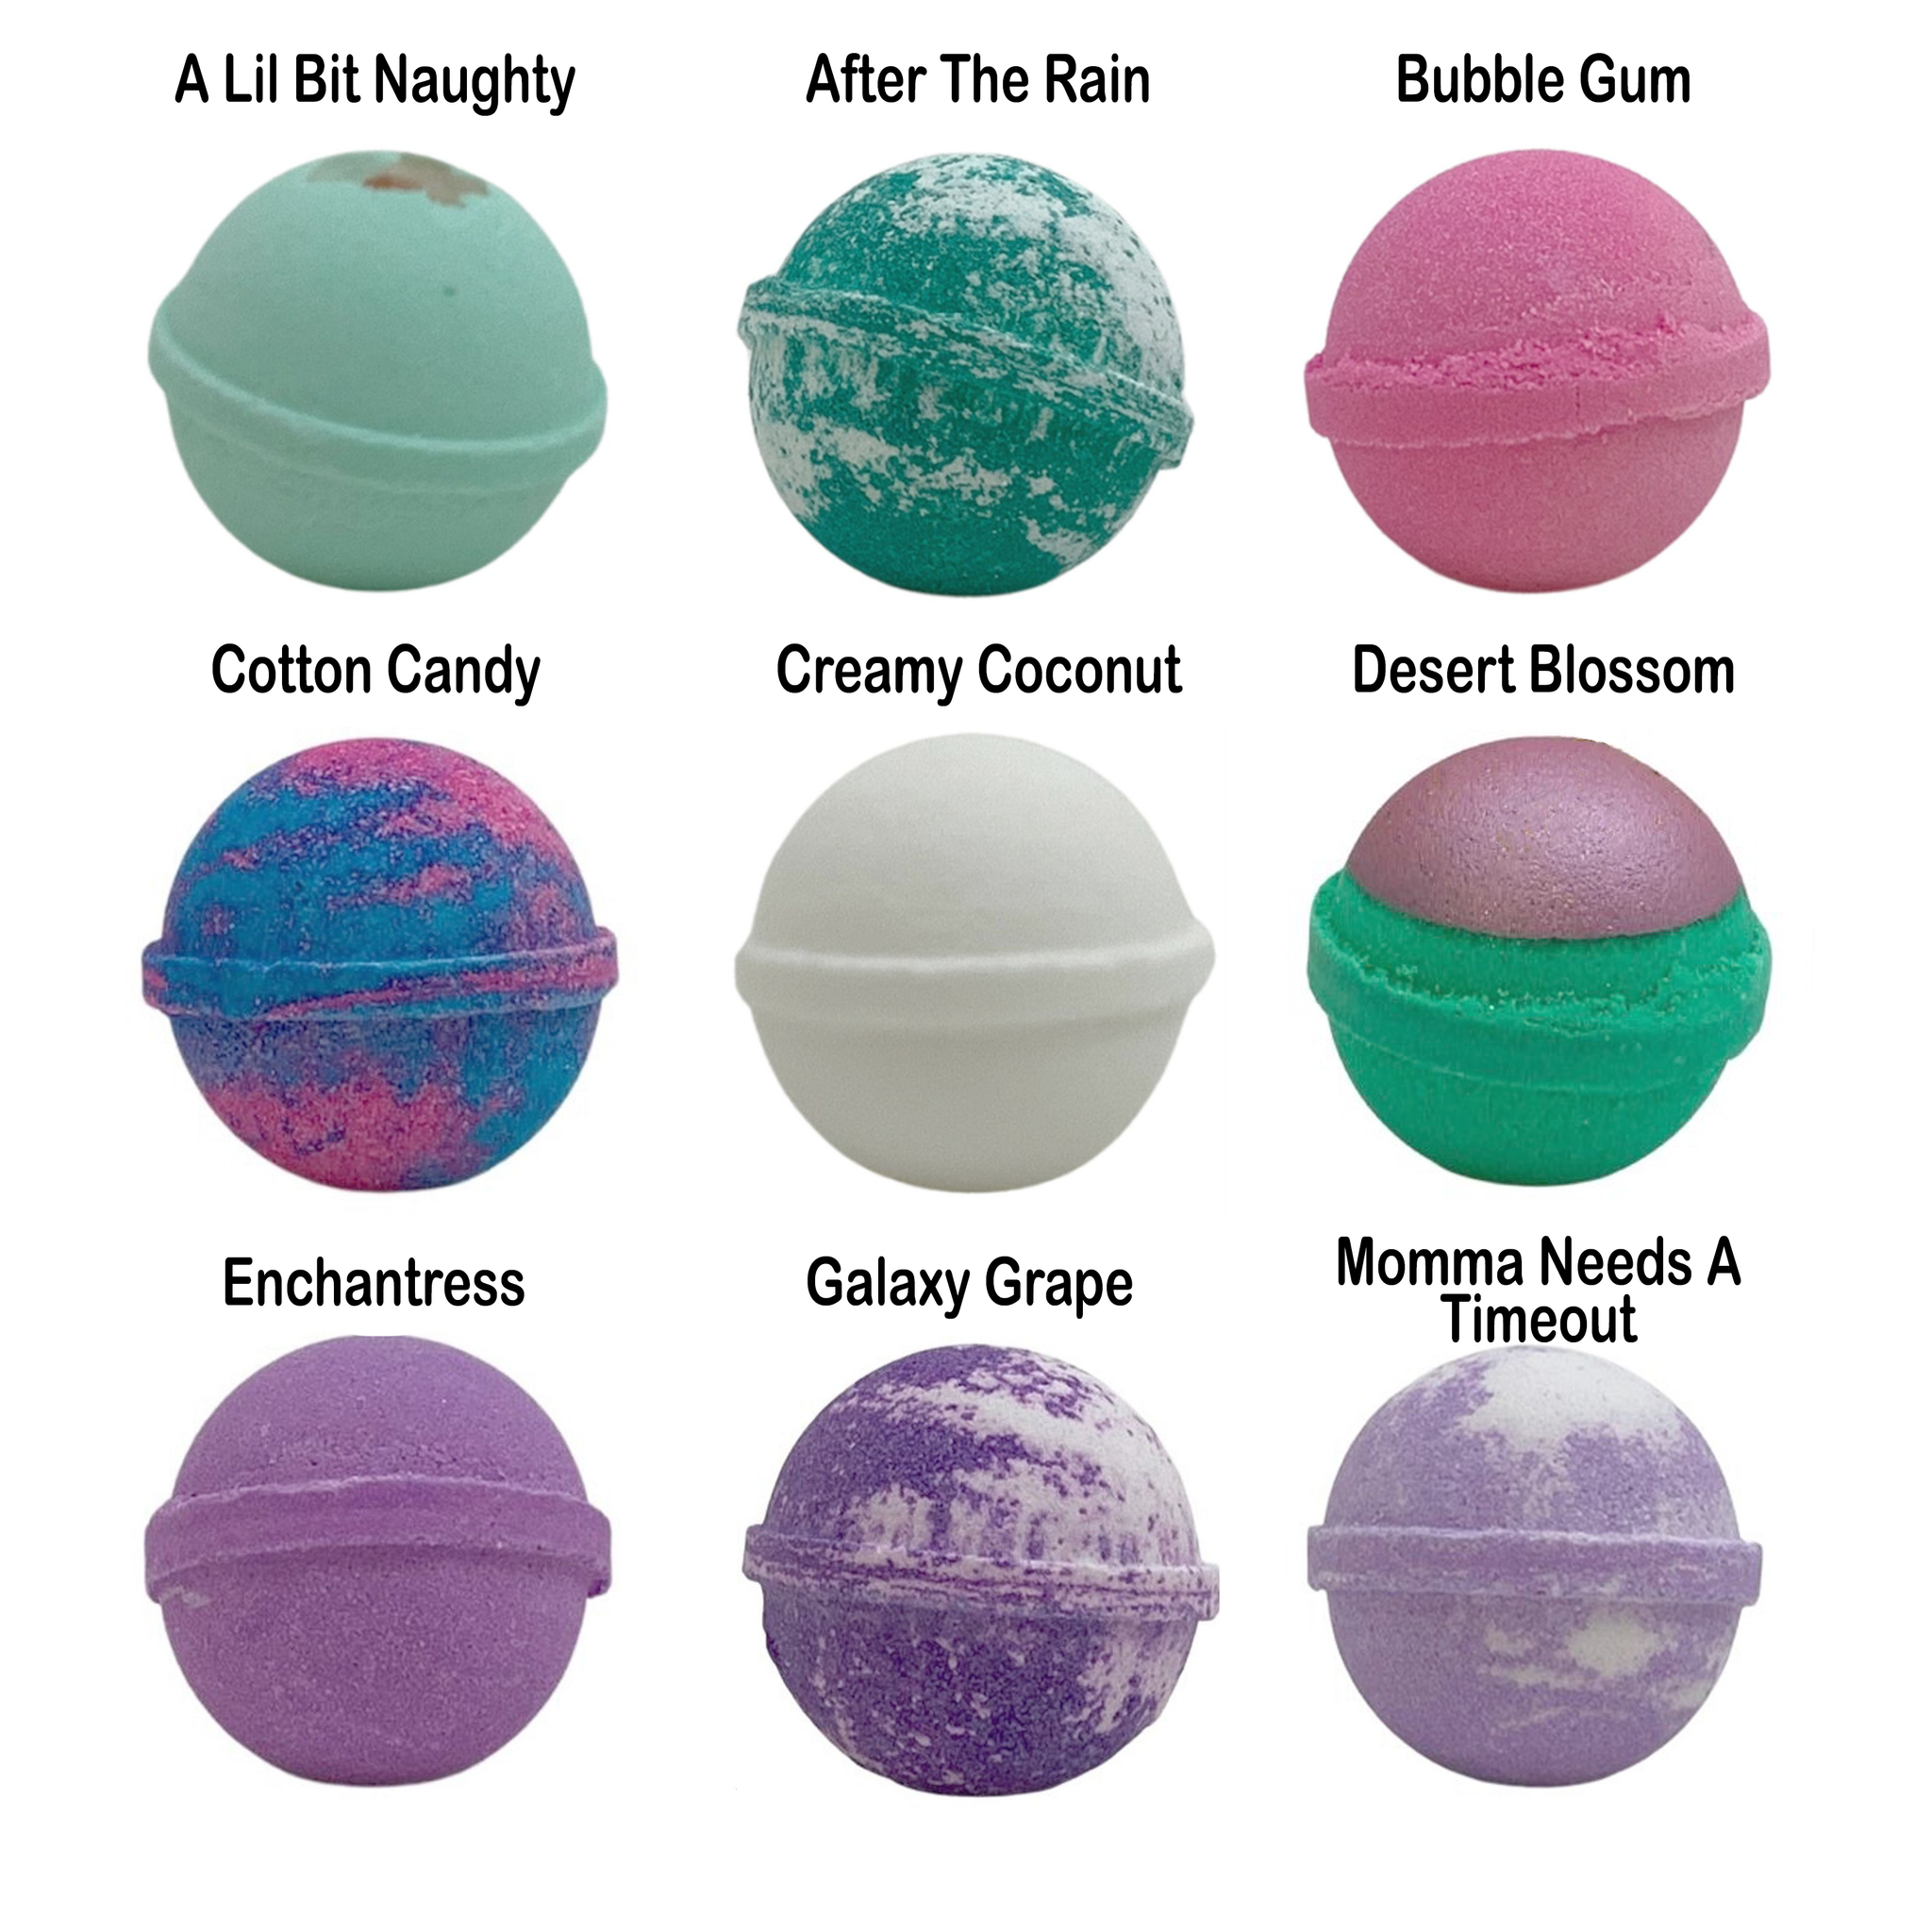 Relaxing Cotton Candy Bath Bombs